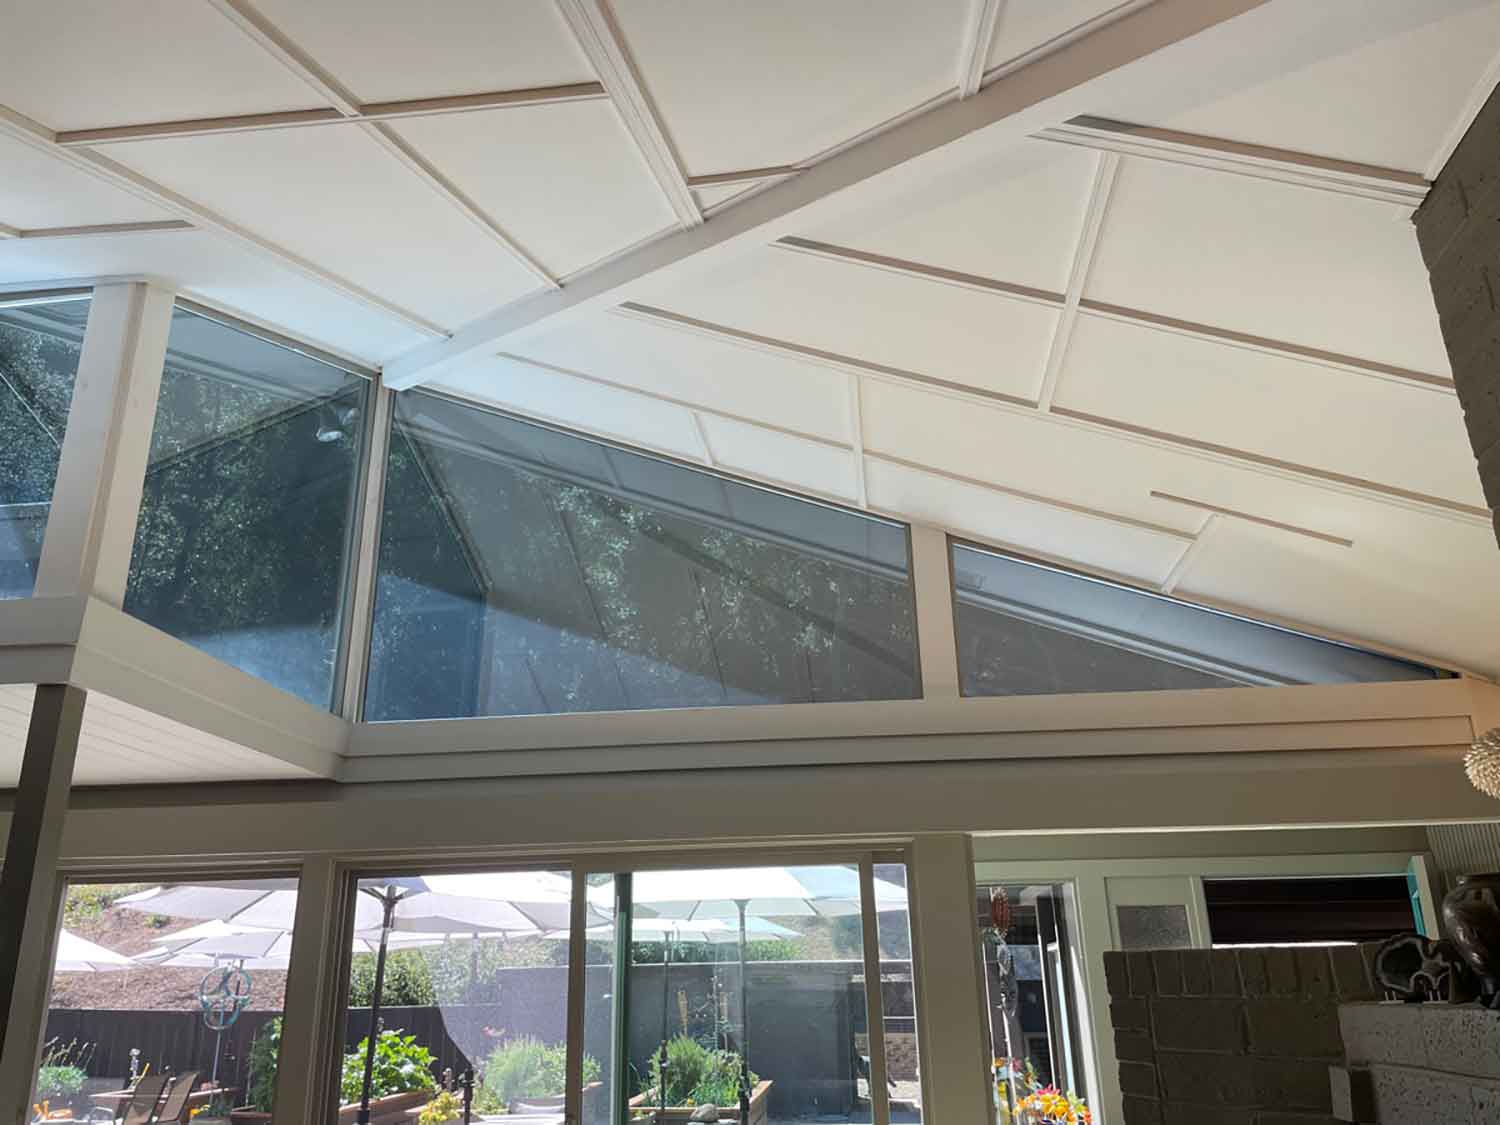 Protecting art, furniture, and people with 3M Window Tint in Orinda, CA.